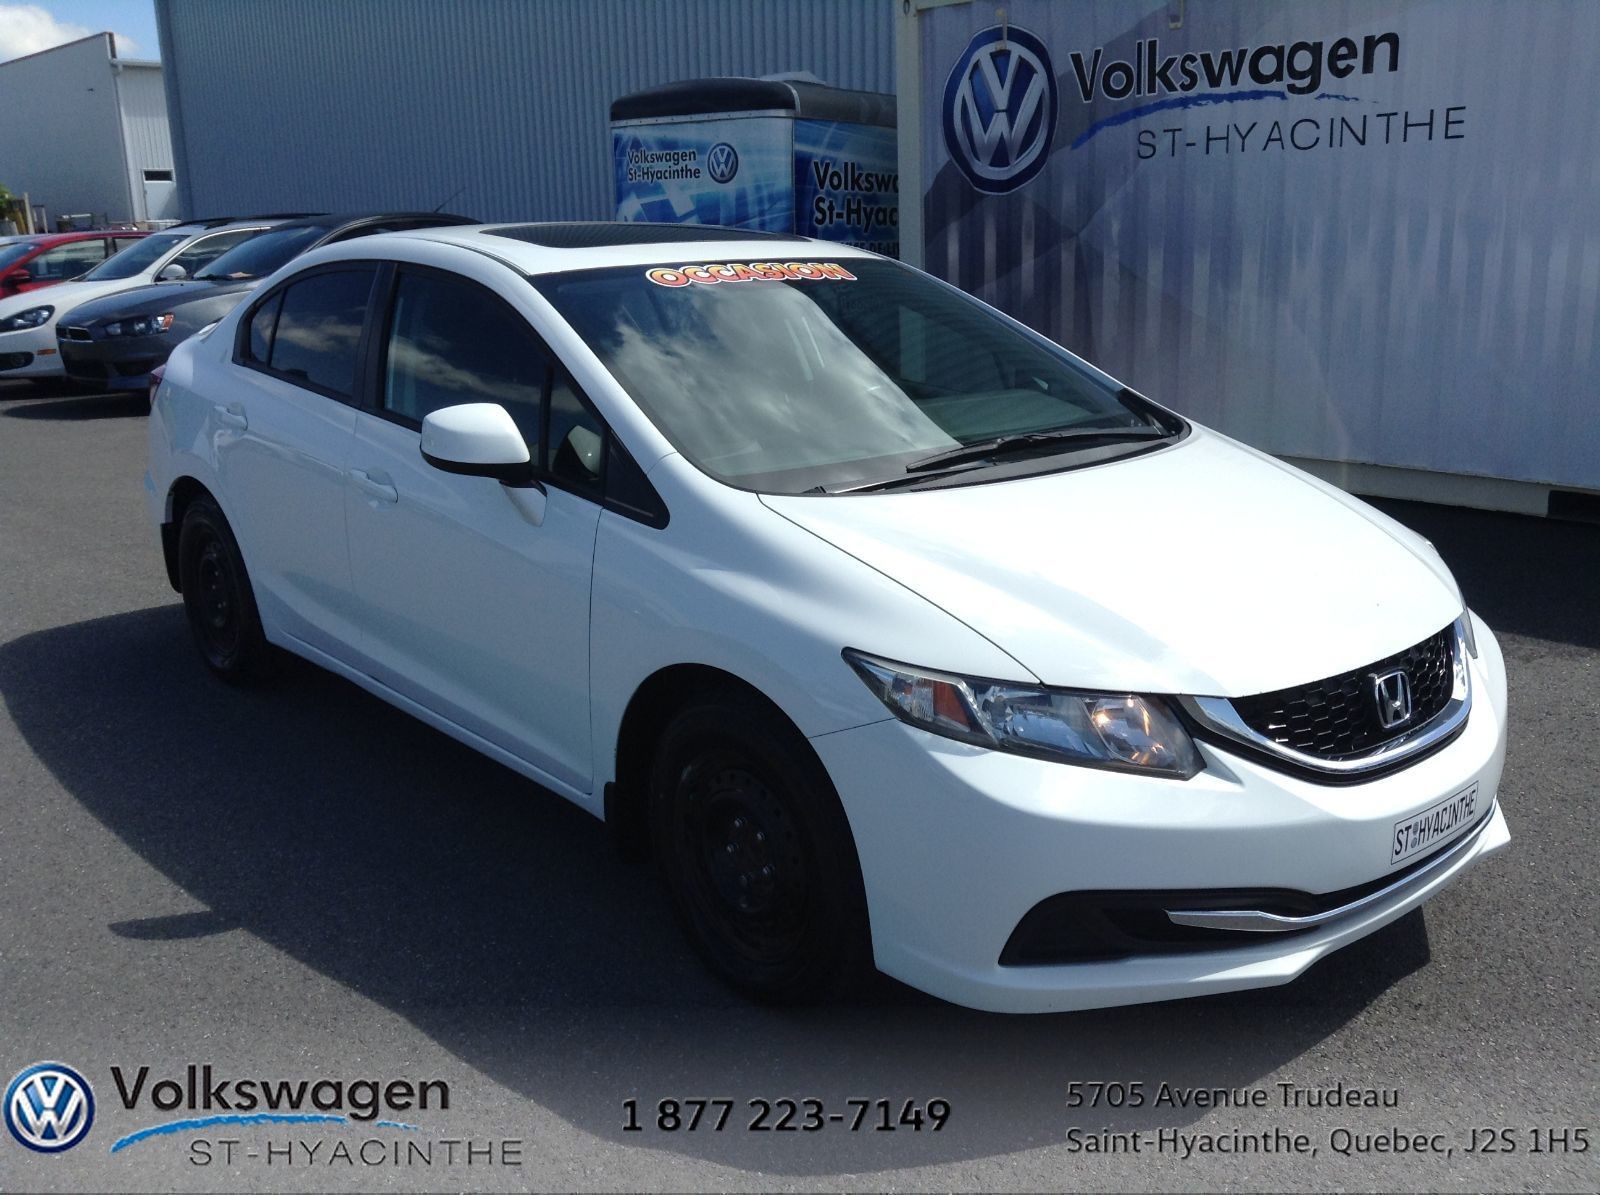 Used 13 Honda Civic Sdn Ex Toit Mags White 126 3 Km For Sale 9994 0 Volkswagen St Hyacinthe 4318a